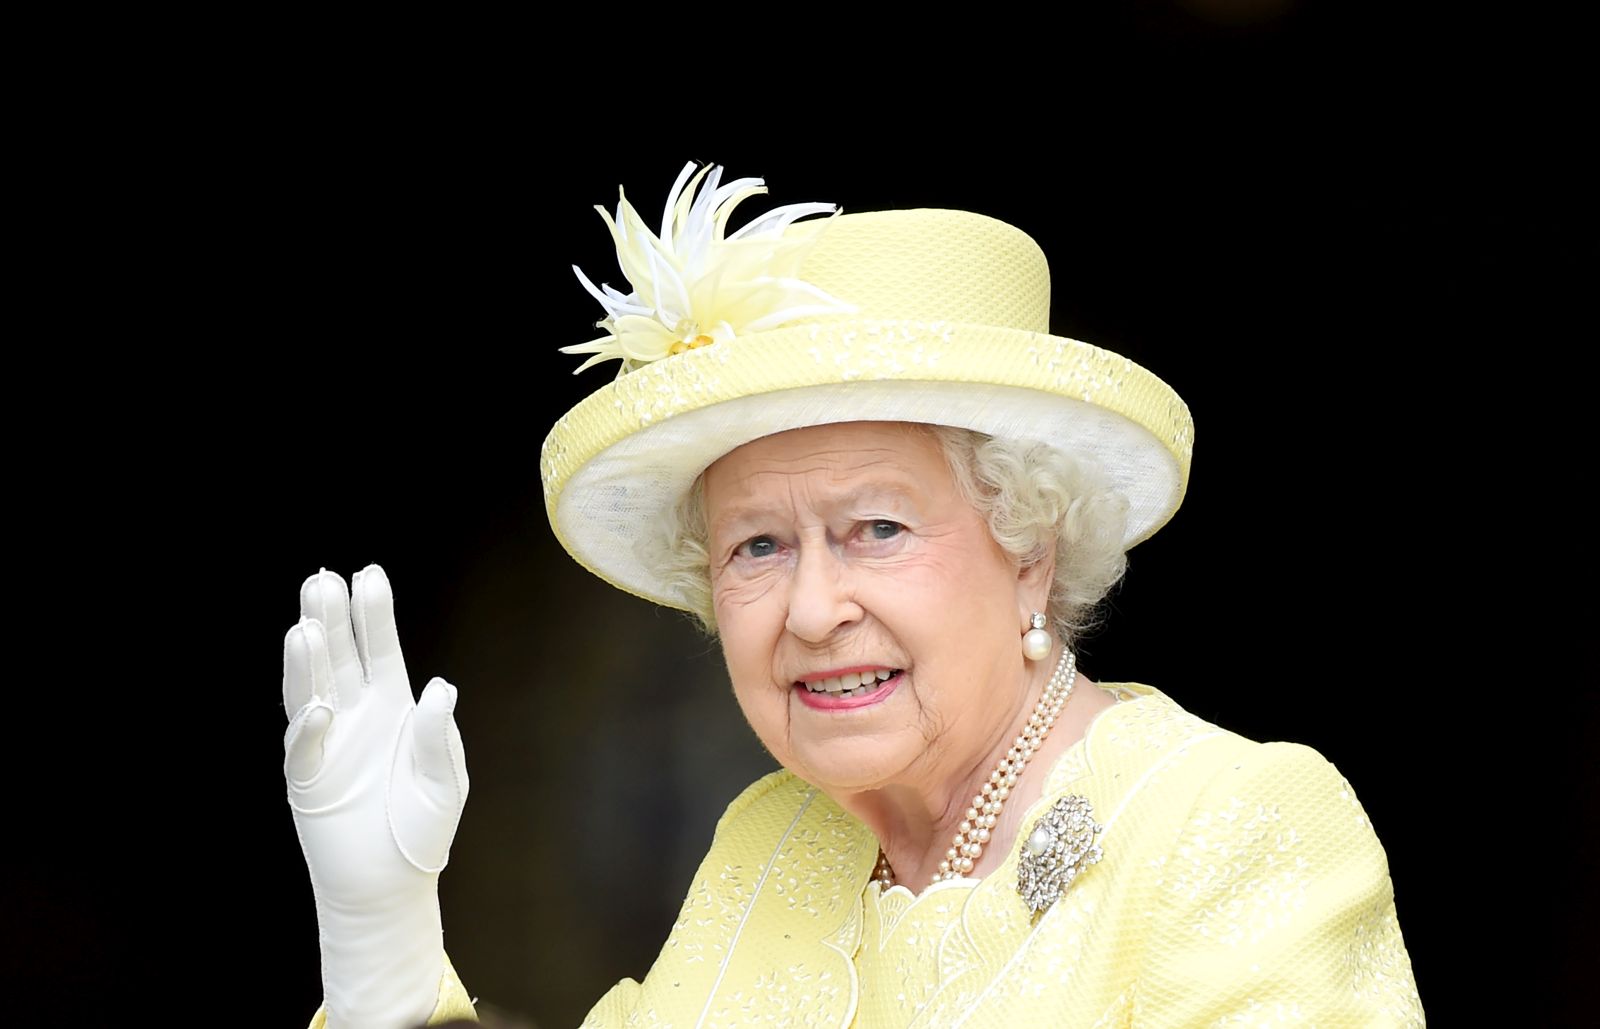 epa10170446 (FILE) - Britain's Elizabeth II waves as she arrives to St Paul's Cathedral ahead of The National Service of Thanksgiving to mark her 90th birthday in London, Britain, 10 June 2016 (reissued 08 September 2022). According to a statement issued by Buckingham Palace on 08 September 2022, Britain's Queen Elizabeth II has died at her Scottish estate, Balmoral Castle, on 08 September 2022. The 96-year-old Queen was the longest-reigning monarch in British history.  EPA/FACUNDO ARRIZABALAGA *** Local Caption *** 52813545